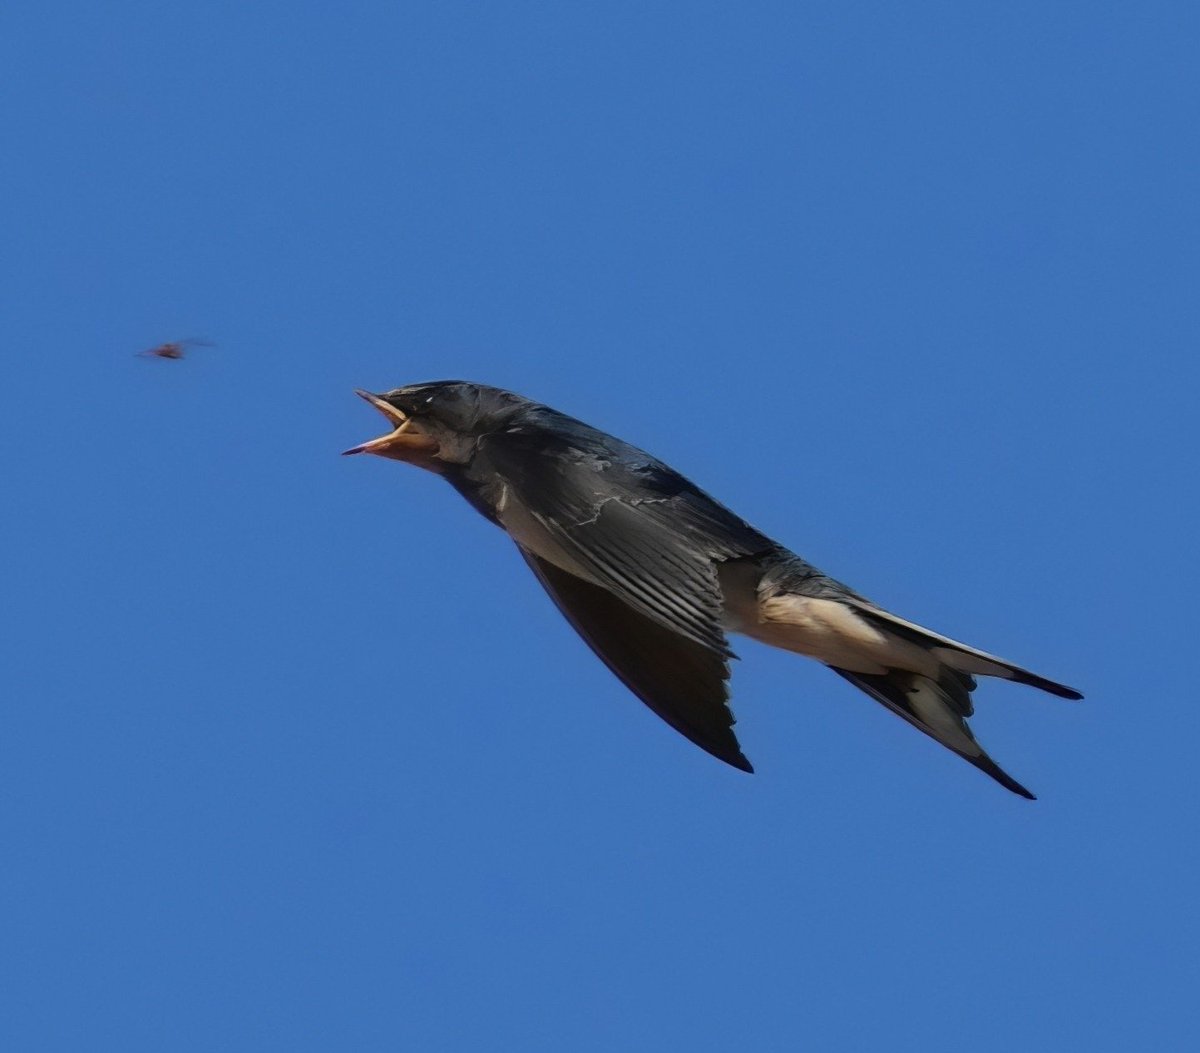 Morning folks, The swallows are settling back in nicely. Saw my neighbours' Housemartins too but yet to see their swifts return. Anyone seen any? 👓 #TwitterNatureCommunity #TwitterNaturePhotography #swallow #hirundines #swifts #birdwatching #BirdsOfX